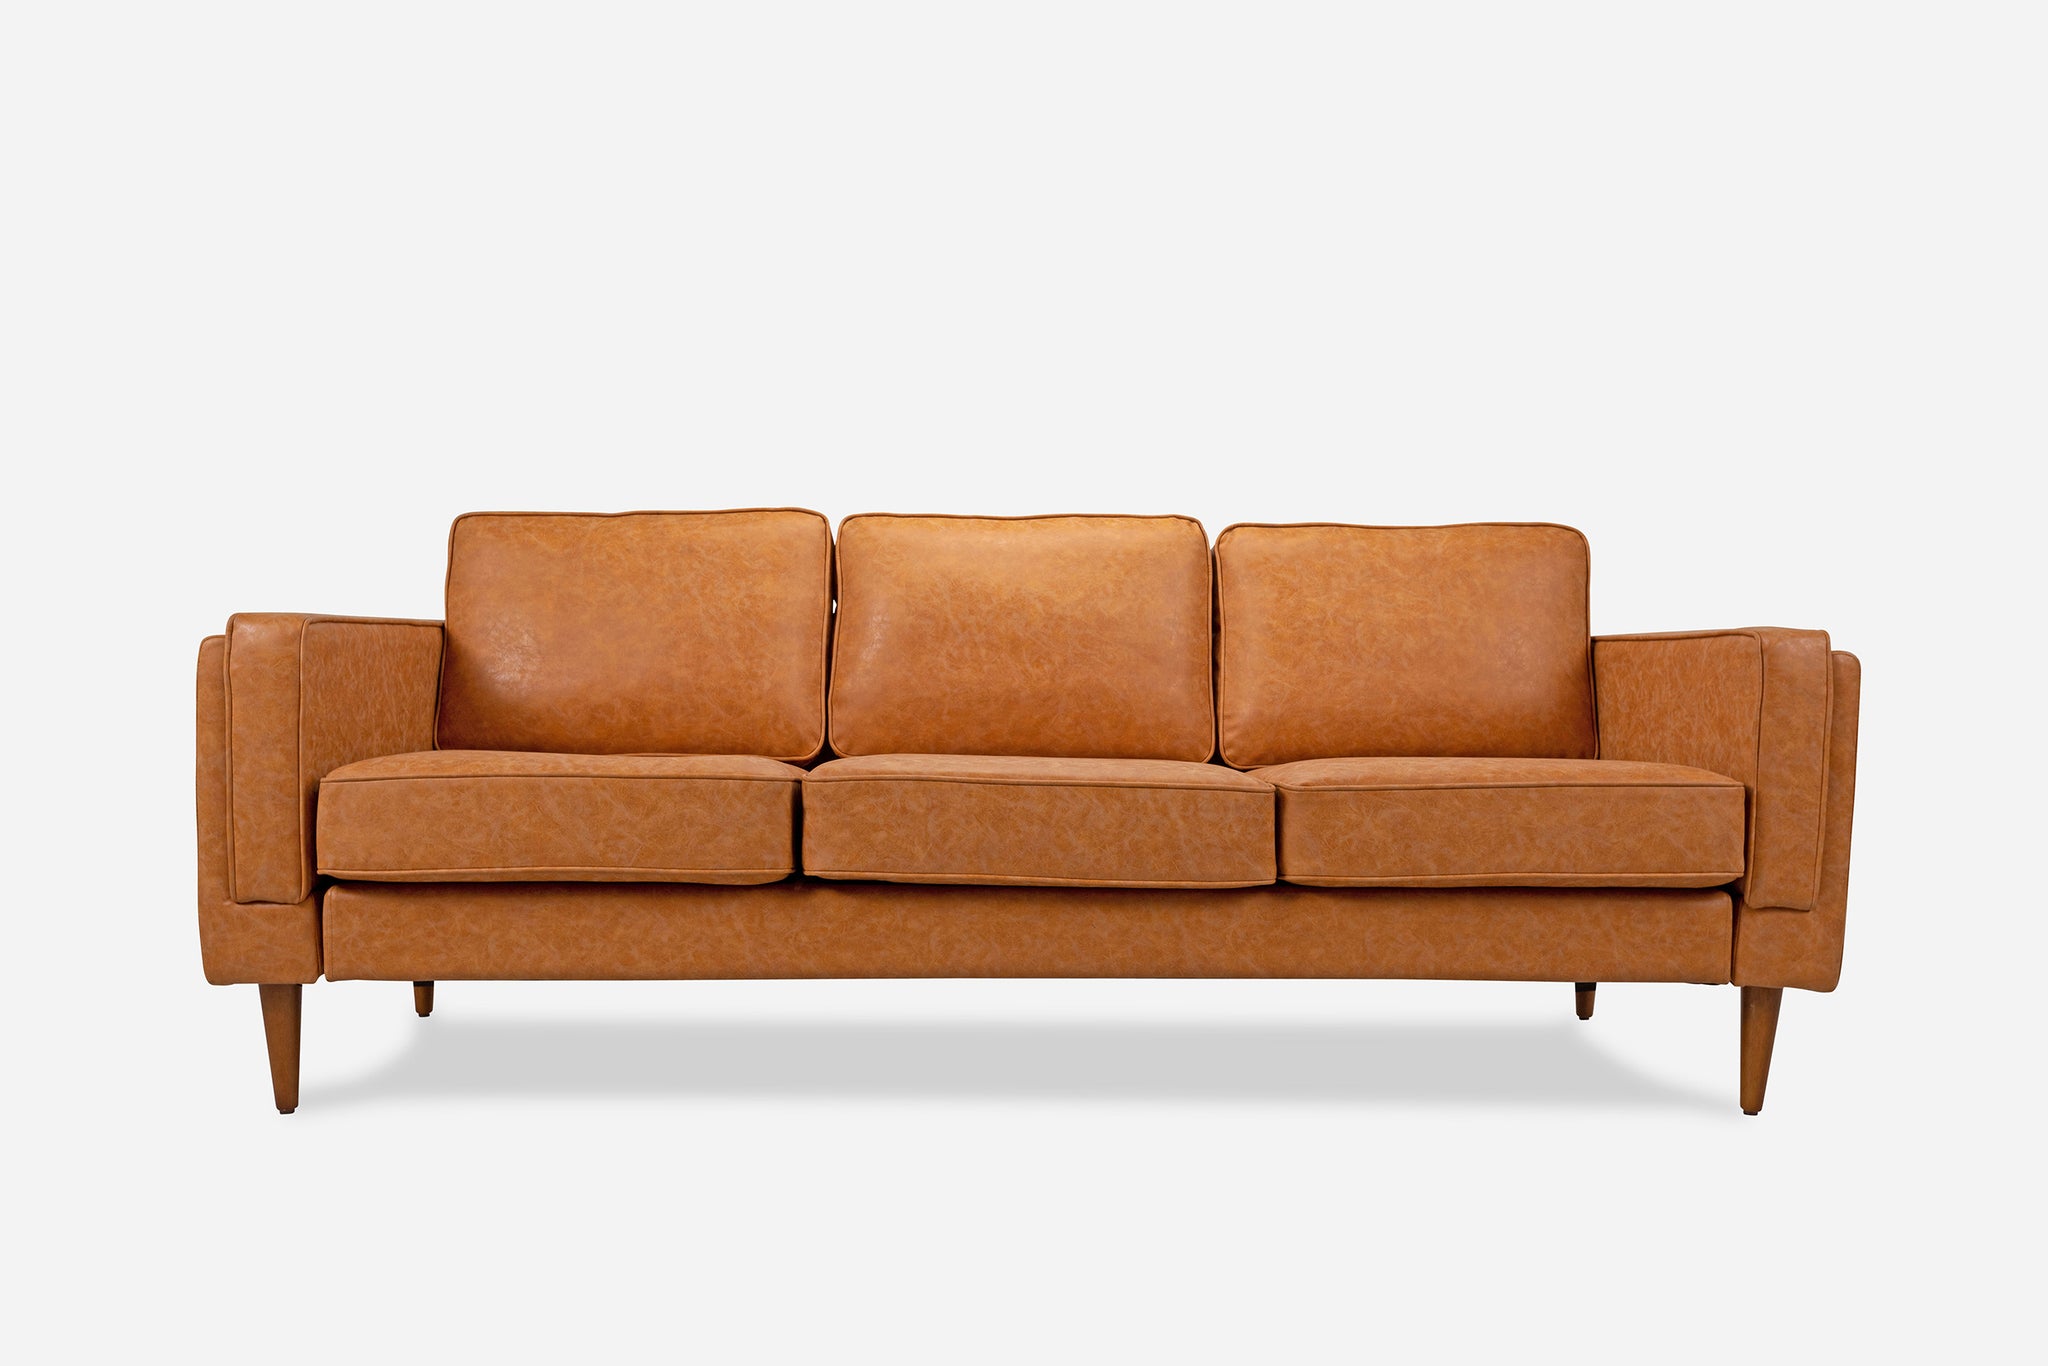 albany sofa shown in distressed vegan leather with walnut legs